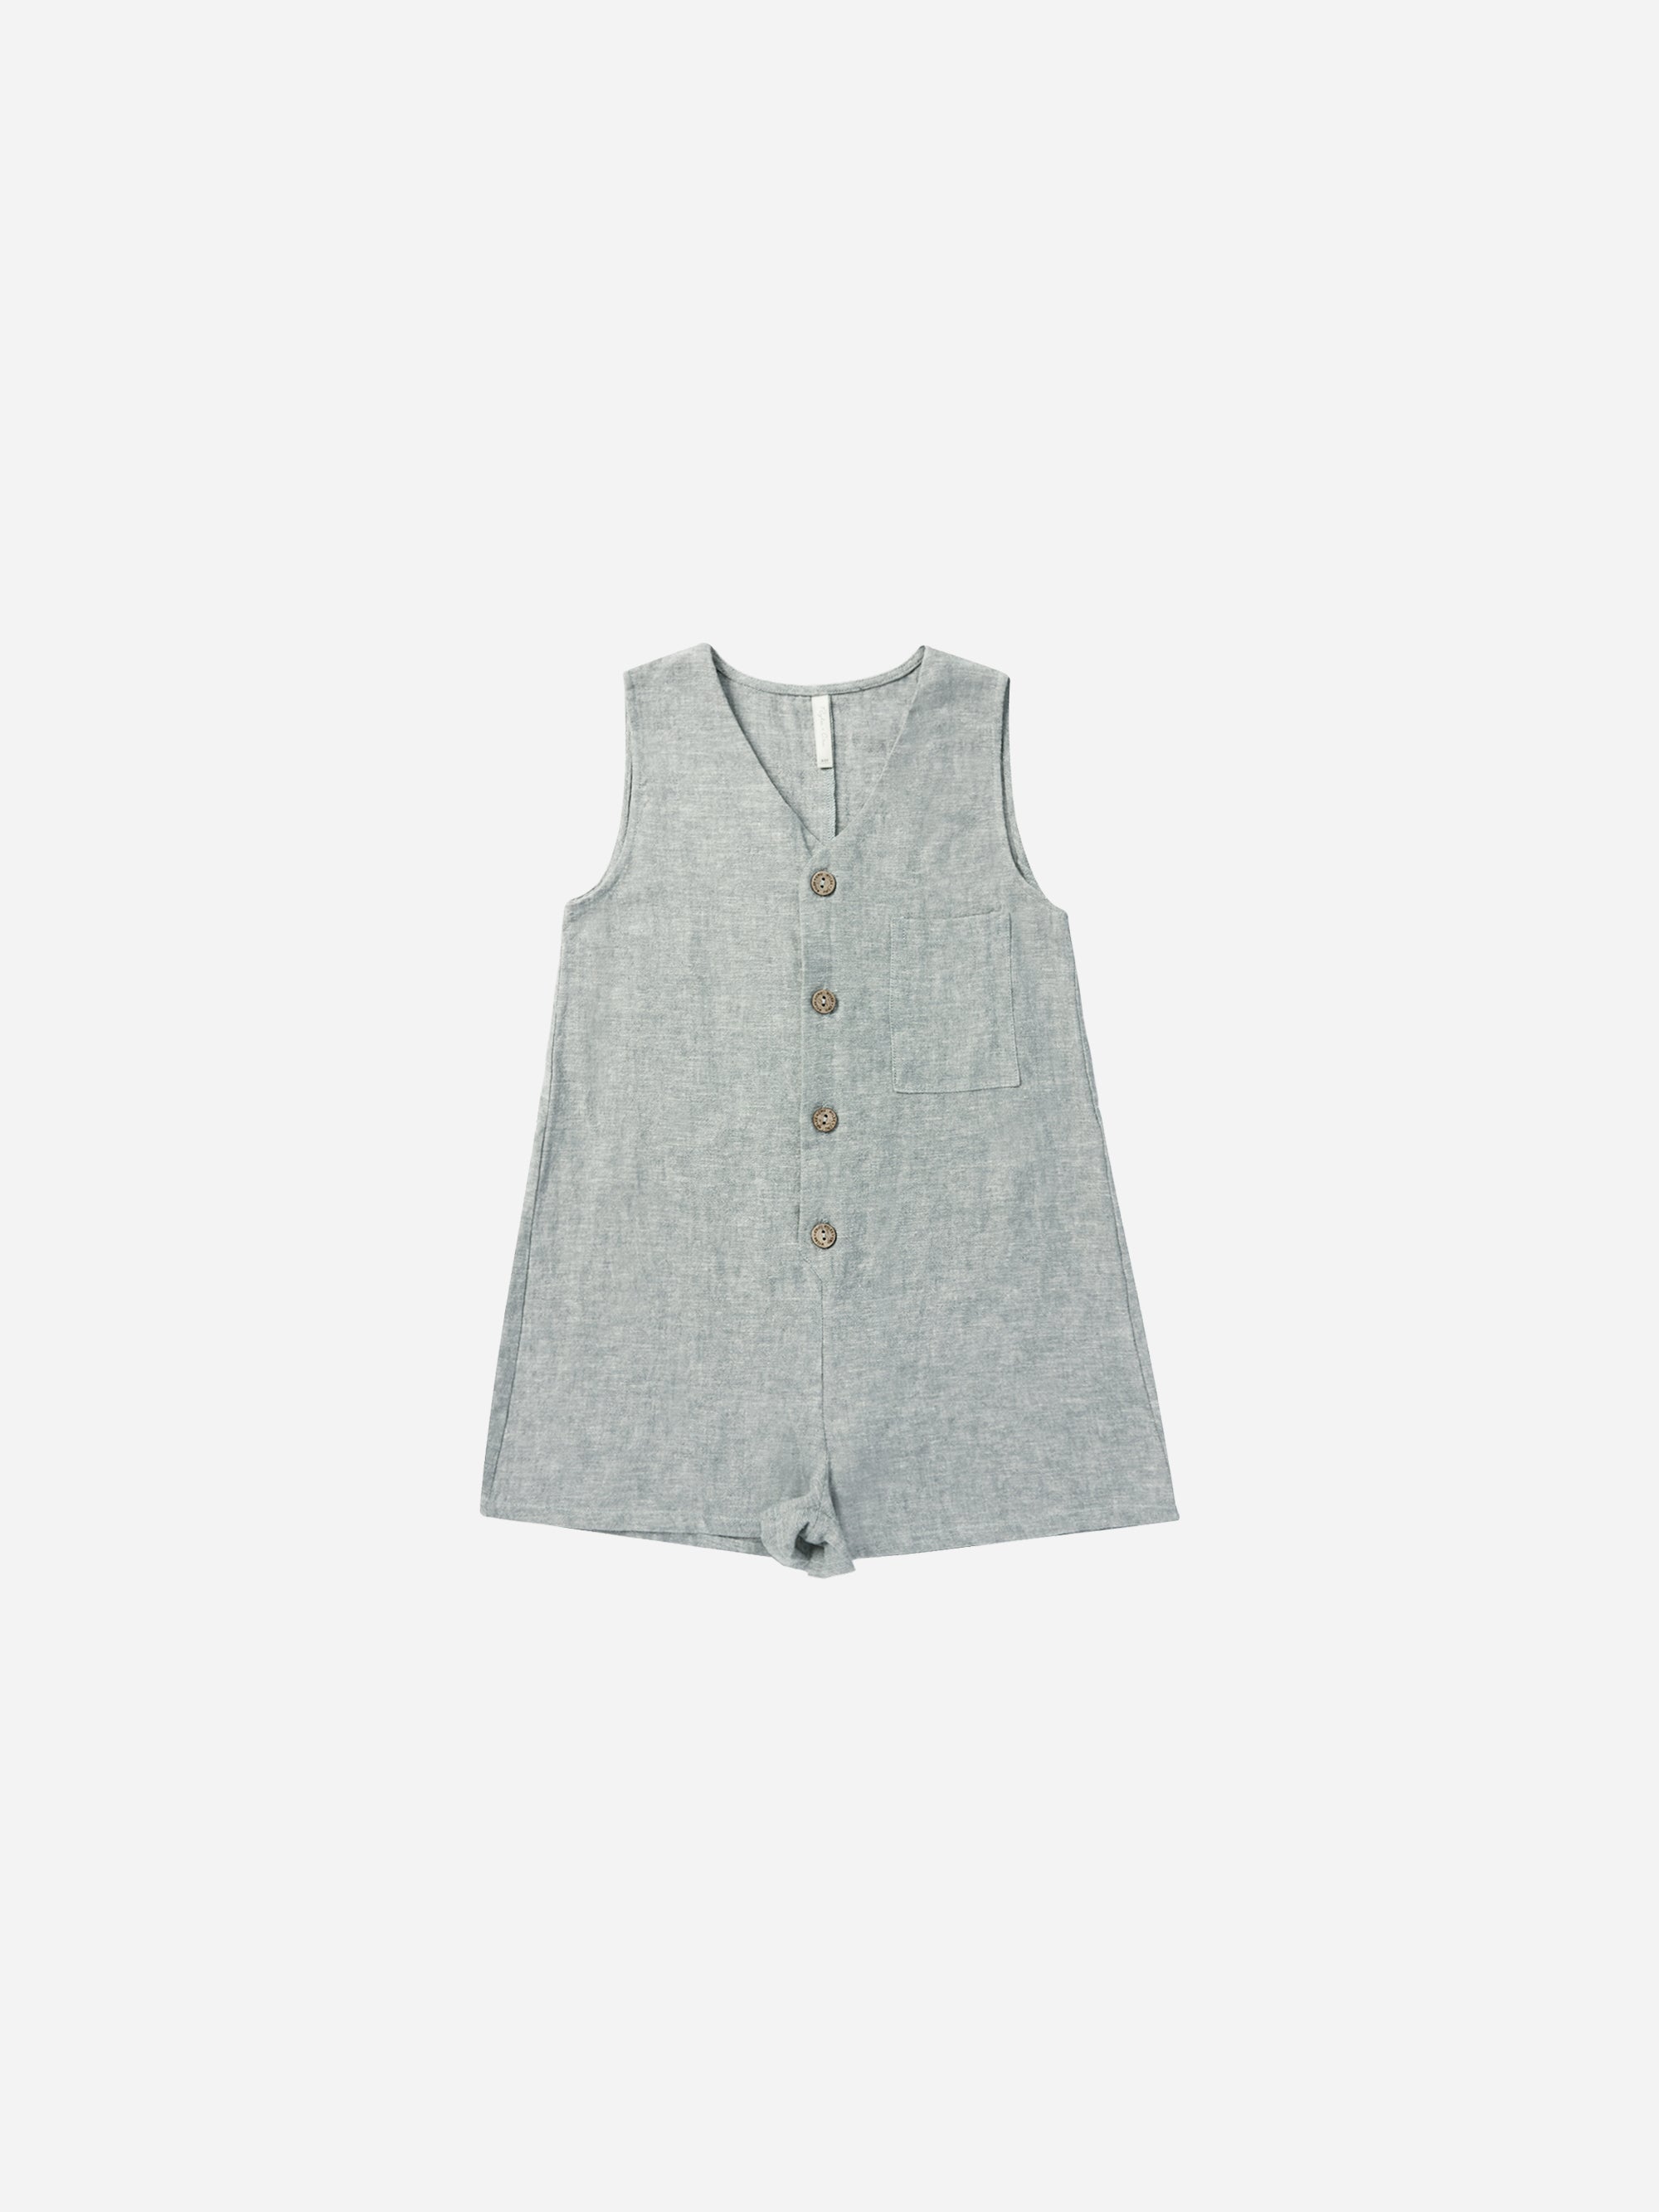 Amari Romper || Heathered Indigo - Rylee + Cru | Kids Clothes | Trendy Baby Clothes | Modern Infant Outfits |